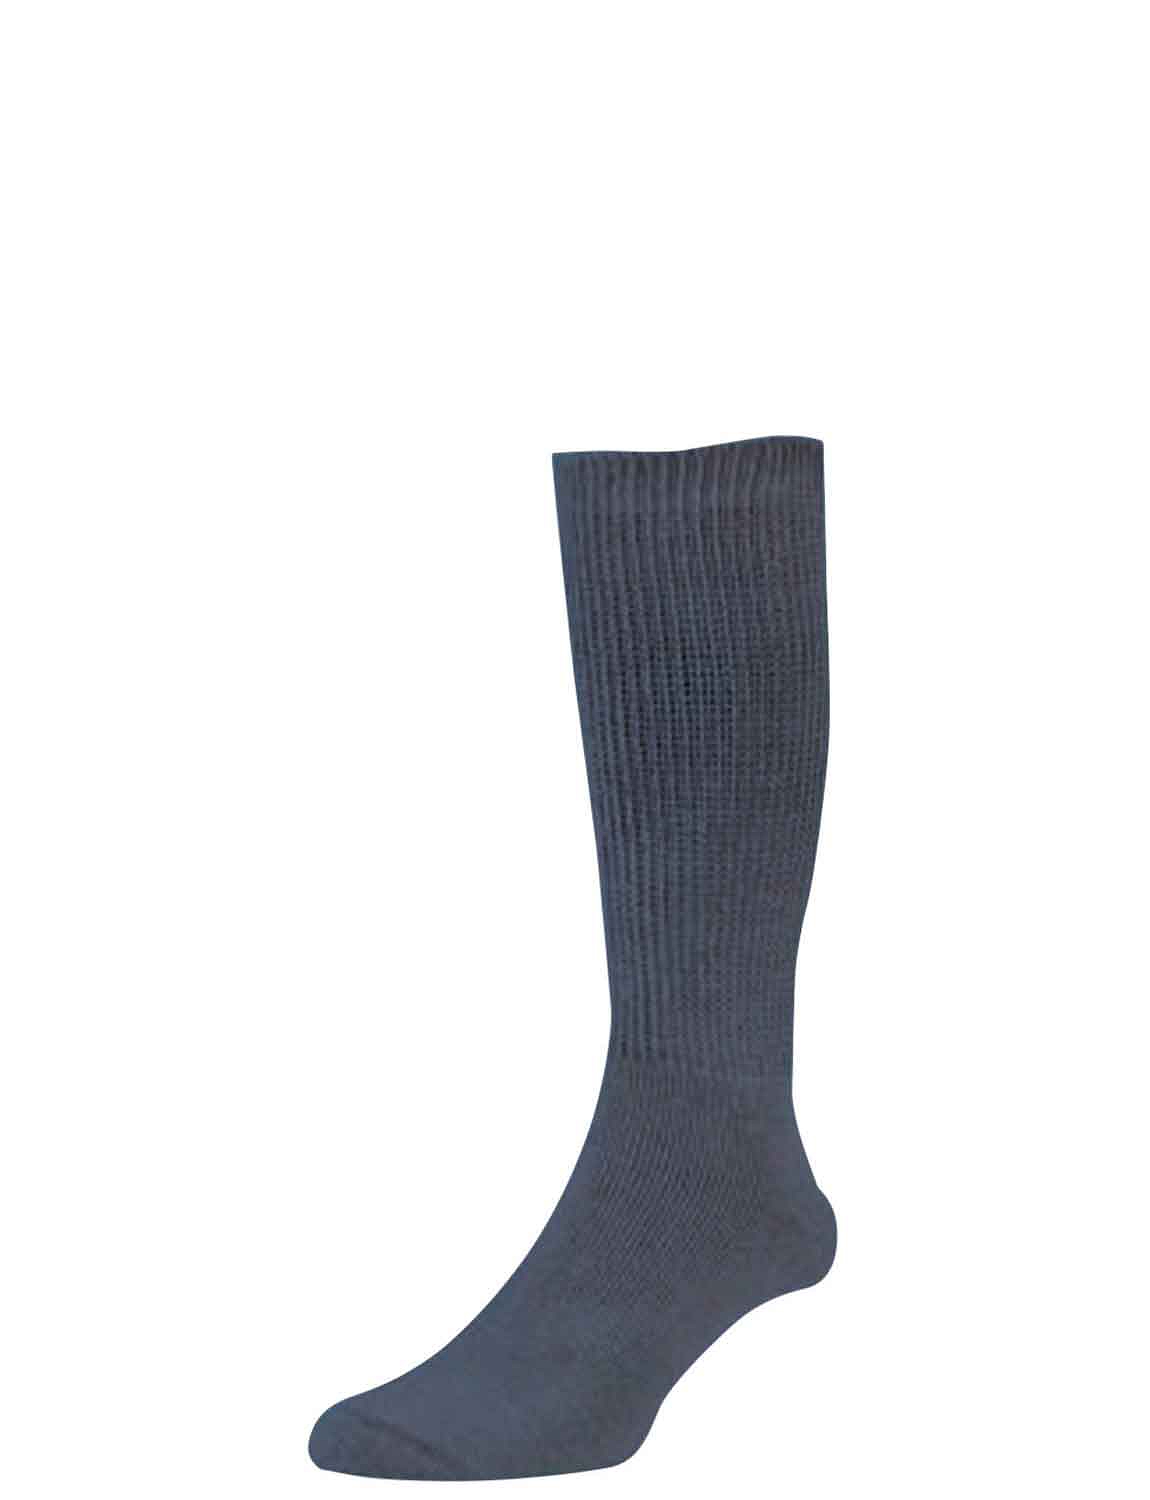 HJ Hall Pack of 2 Cotton Diabetic Socks | Chums